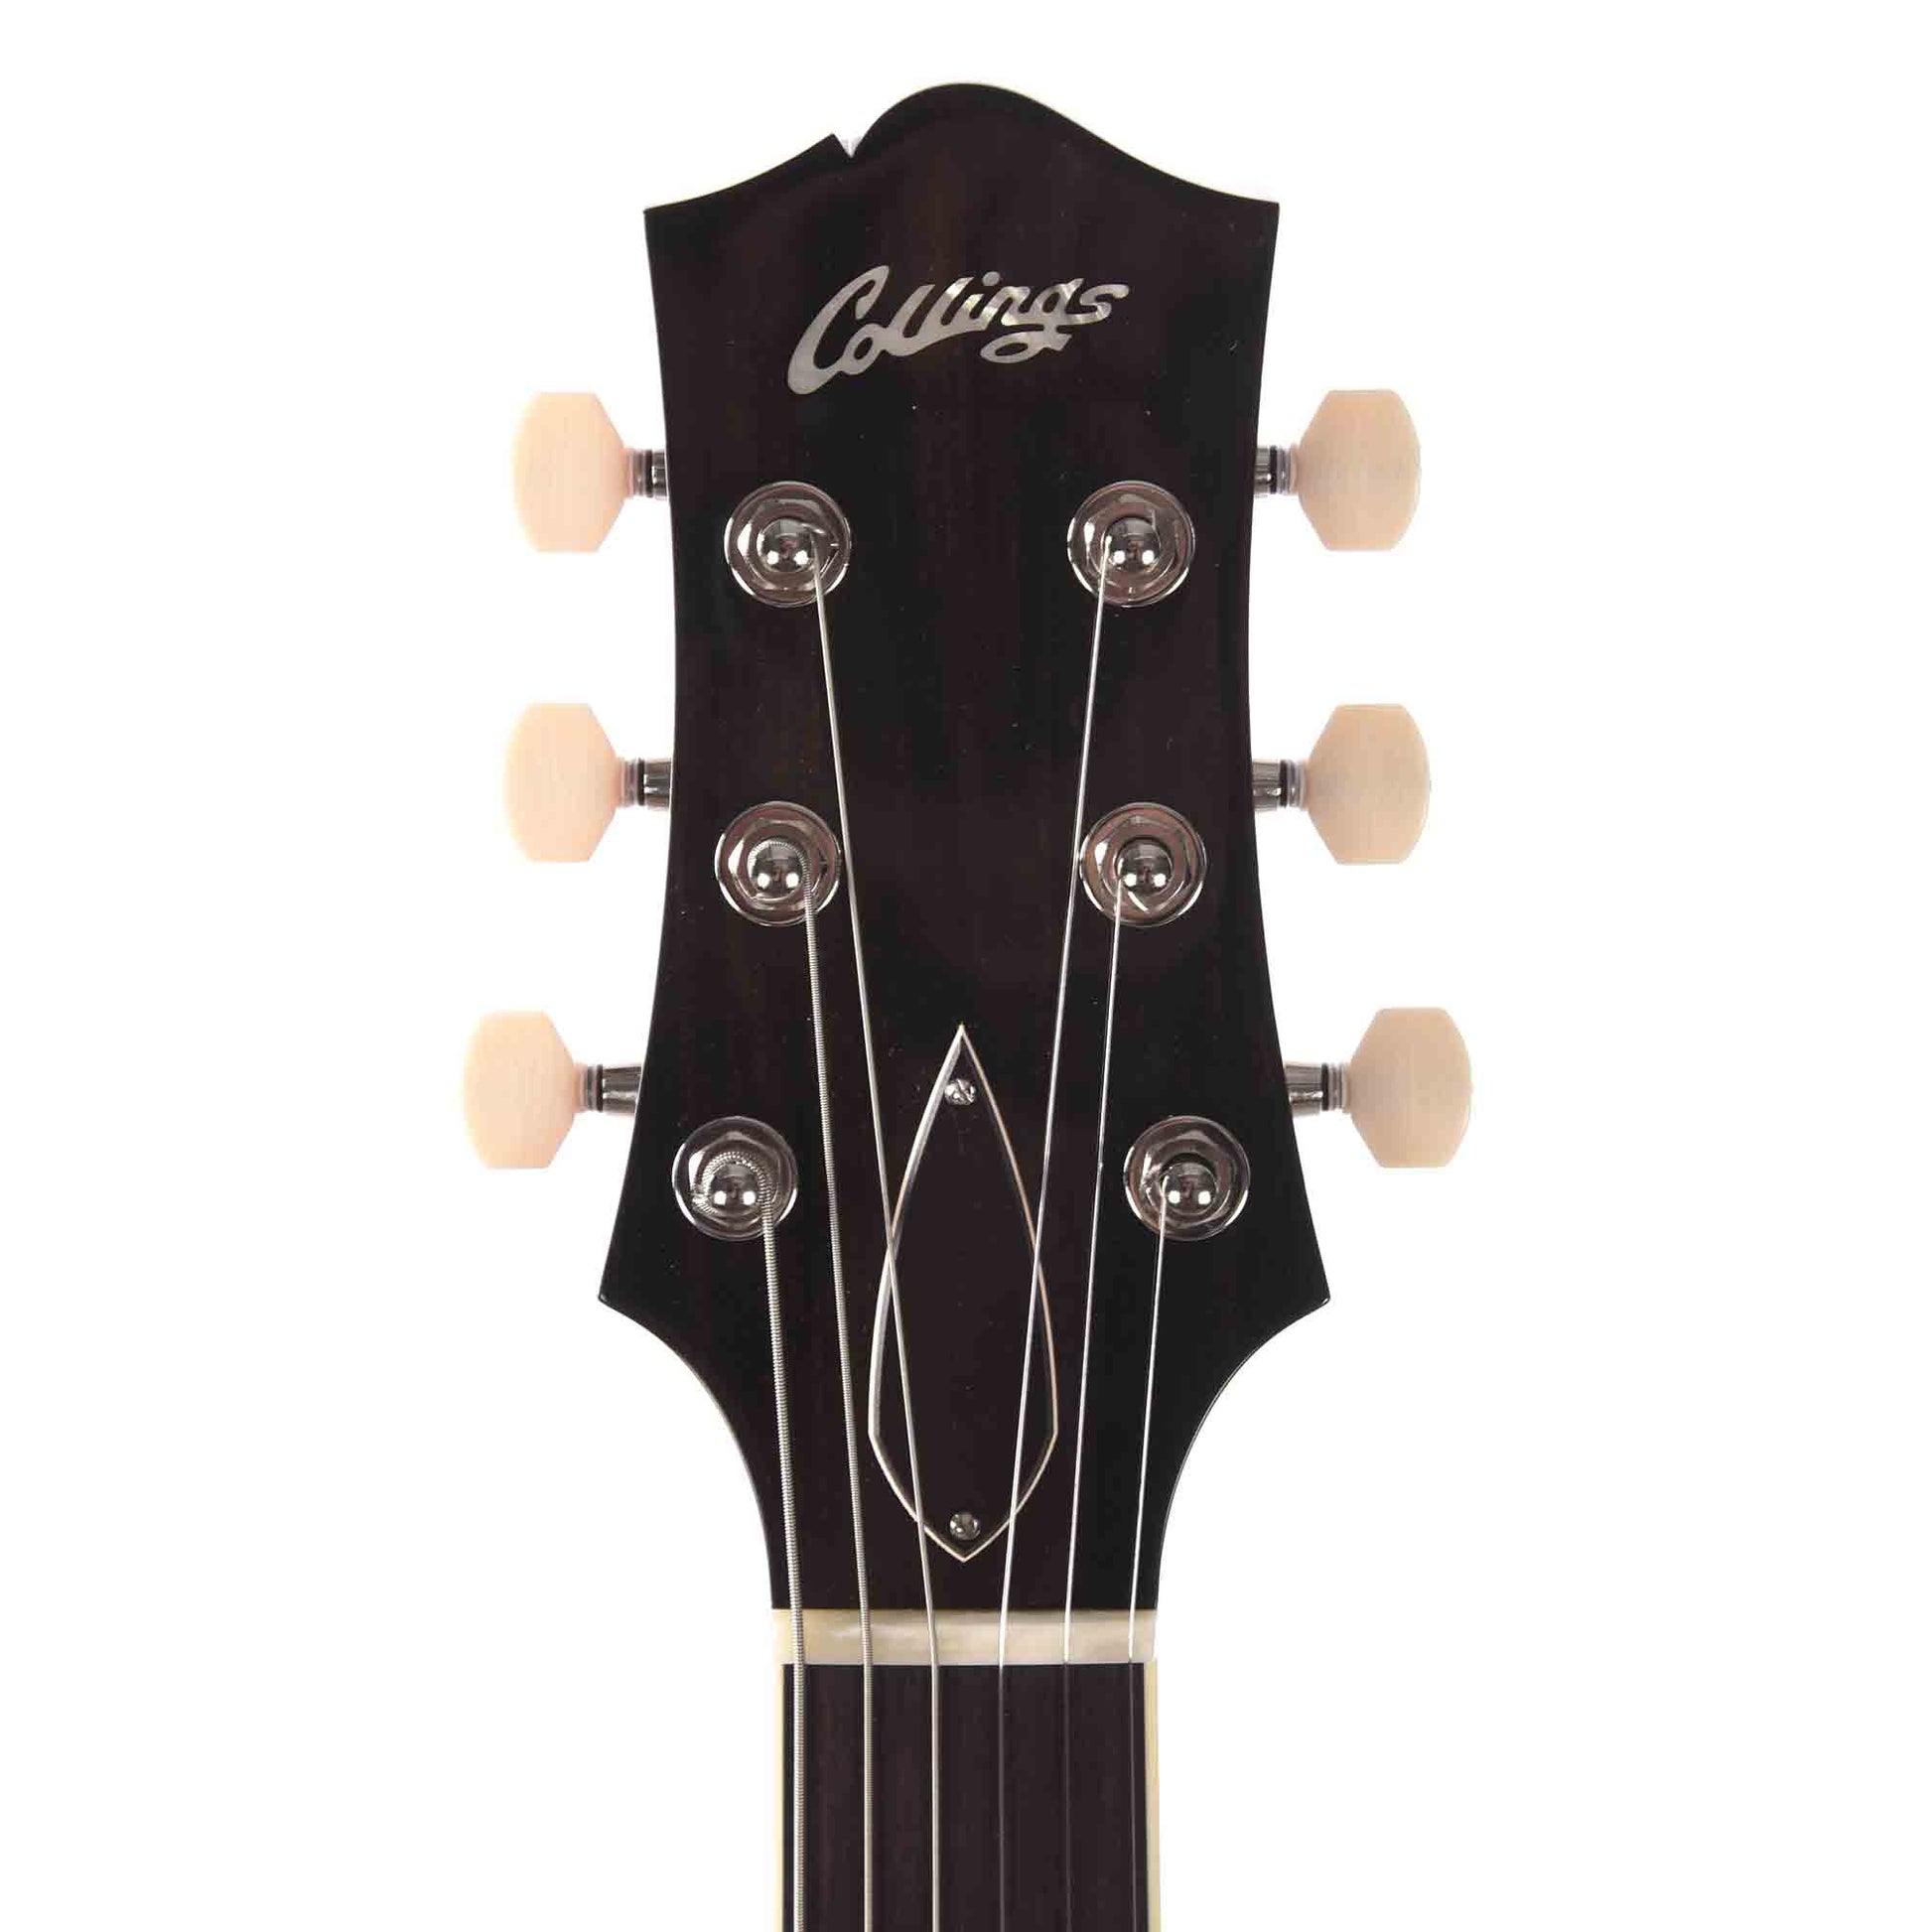 Collings City Limits Standard Iced Tea w/Lollar Low-Wind Imperials Electric Guitars / Solid Body